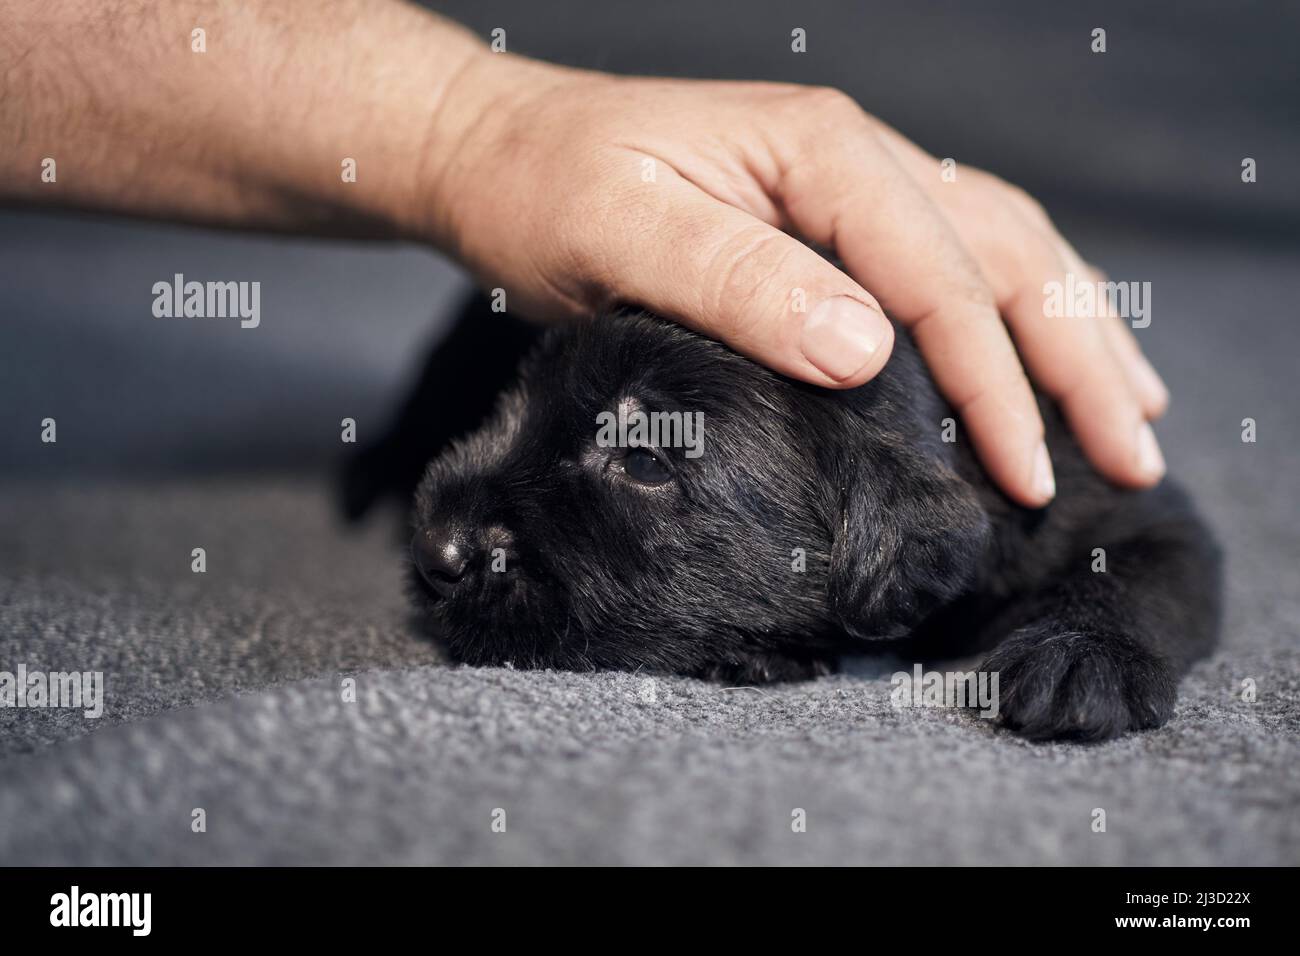 Large hand of pet owner stroking small dog. Cute puppy of Black Giant Schnauzer lying on sofa. Stock Photo